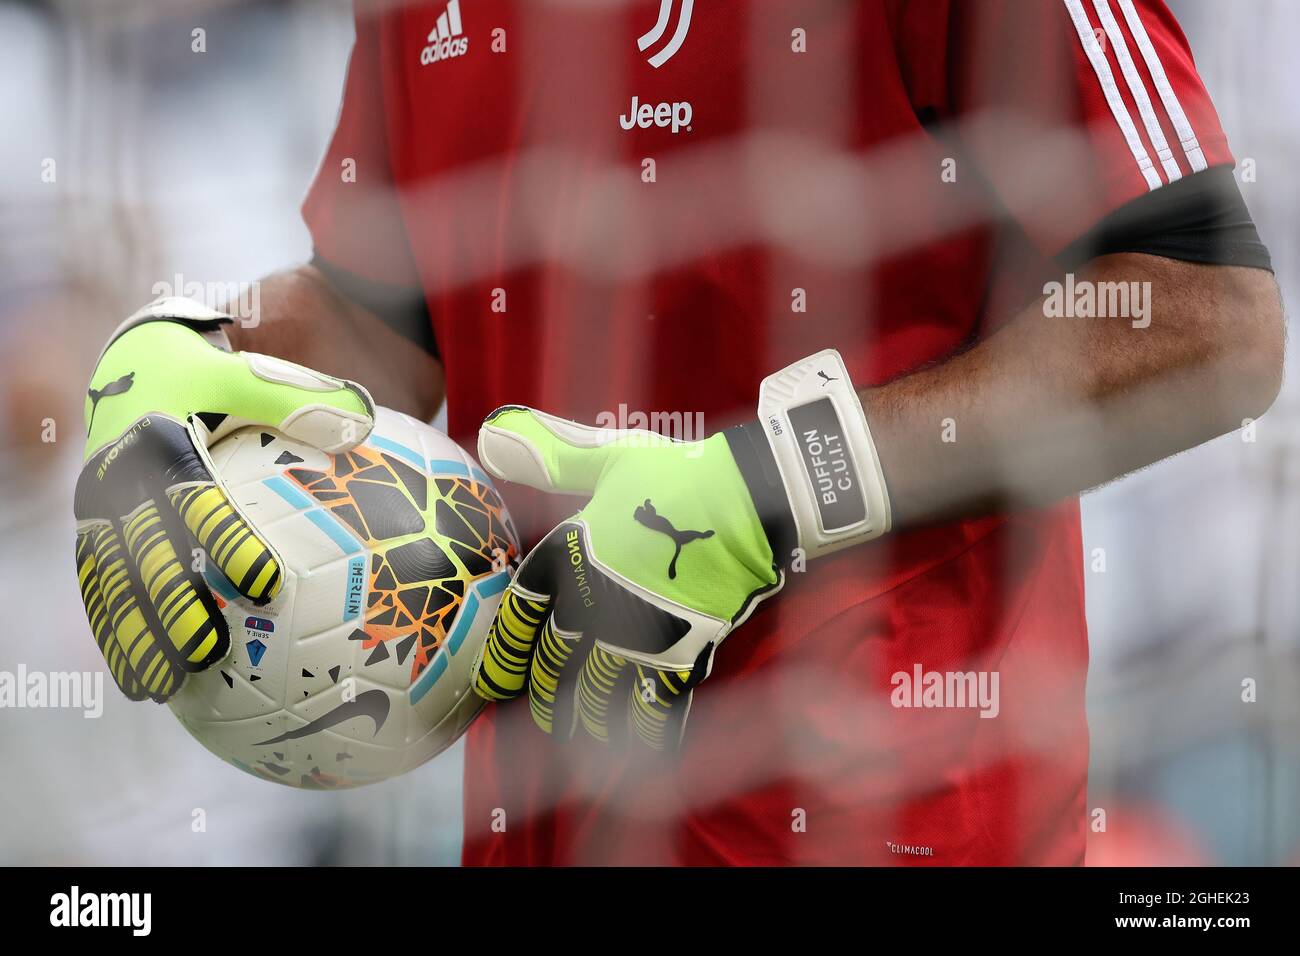 Gianluigi Buffon of Juventus's gloves pictured as he holds a Serie A  official Nike Merlin matchball during the pre match warm up of the Serie A  match at Allianz Stadium, Turin. Picture